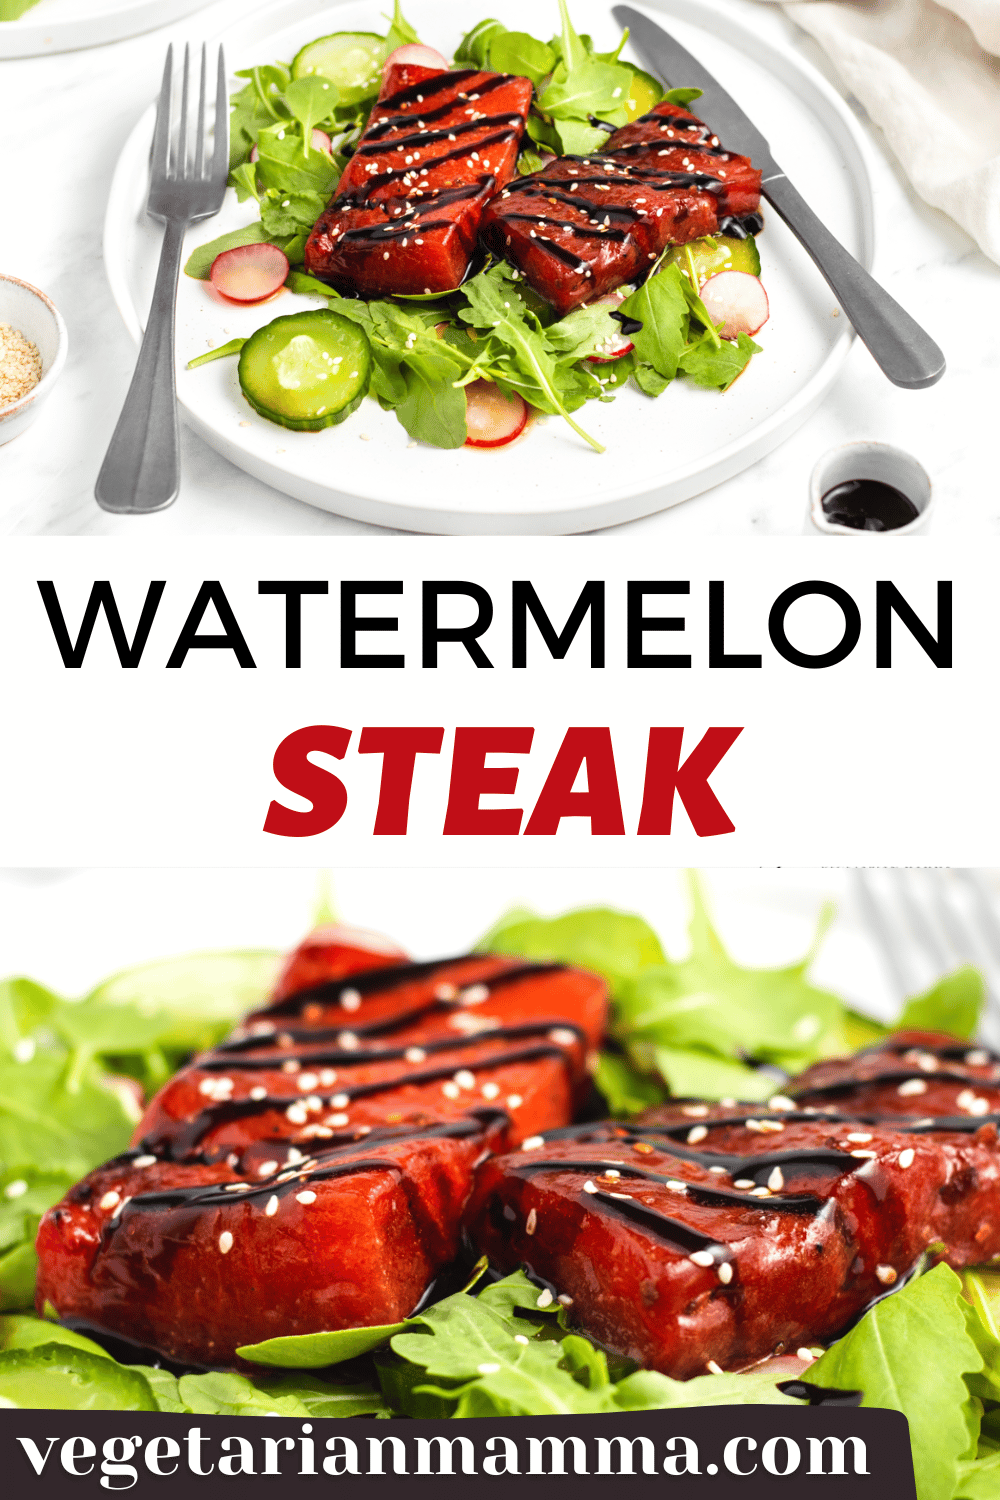 Pan seared Watermelon Steak is a delicious and completely gorgeous vegan meal. Fresh watermelon slices are marinated in miso, garlic, and soy, and then cooked to perfection, turning juicy melon into perfectly chewy steaks.